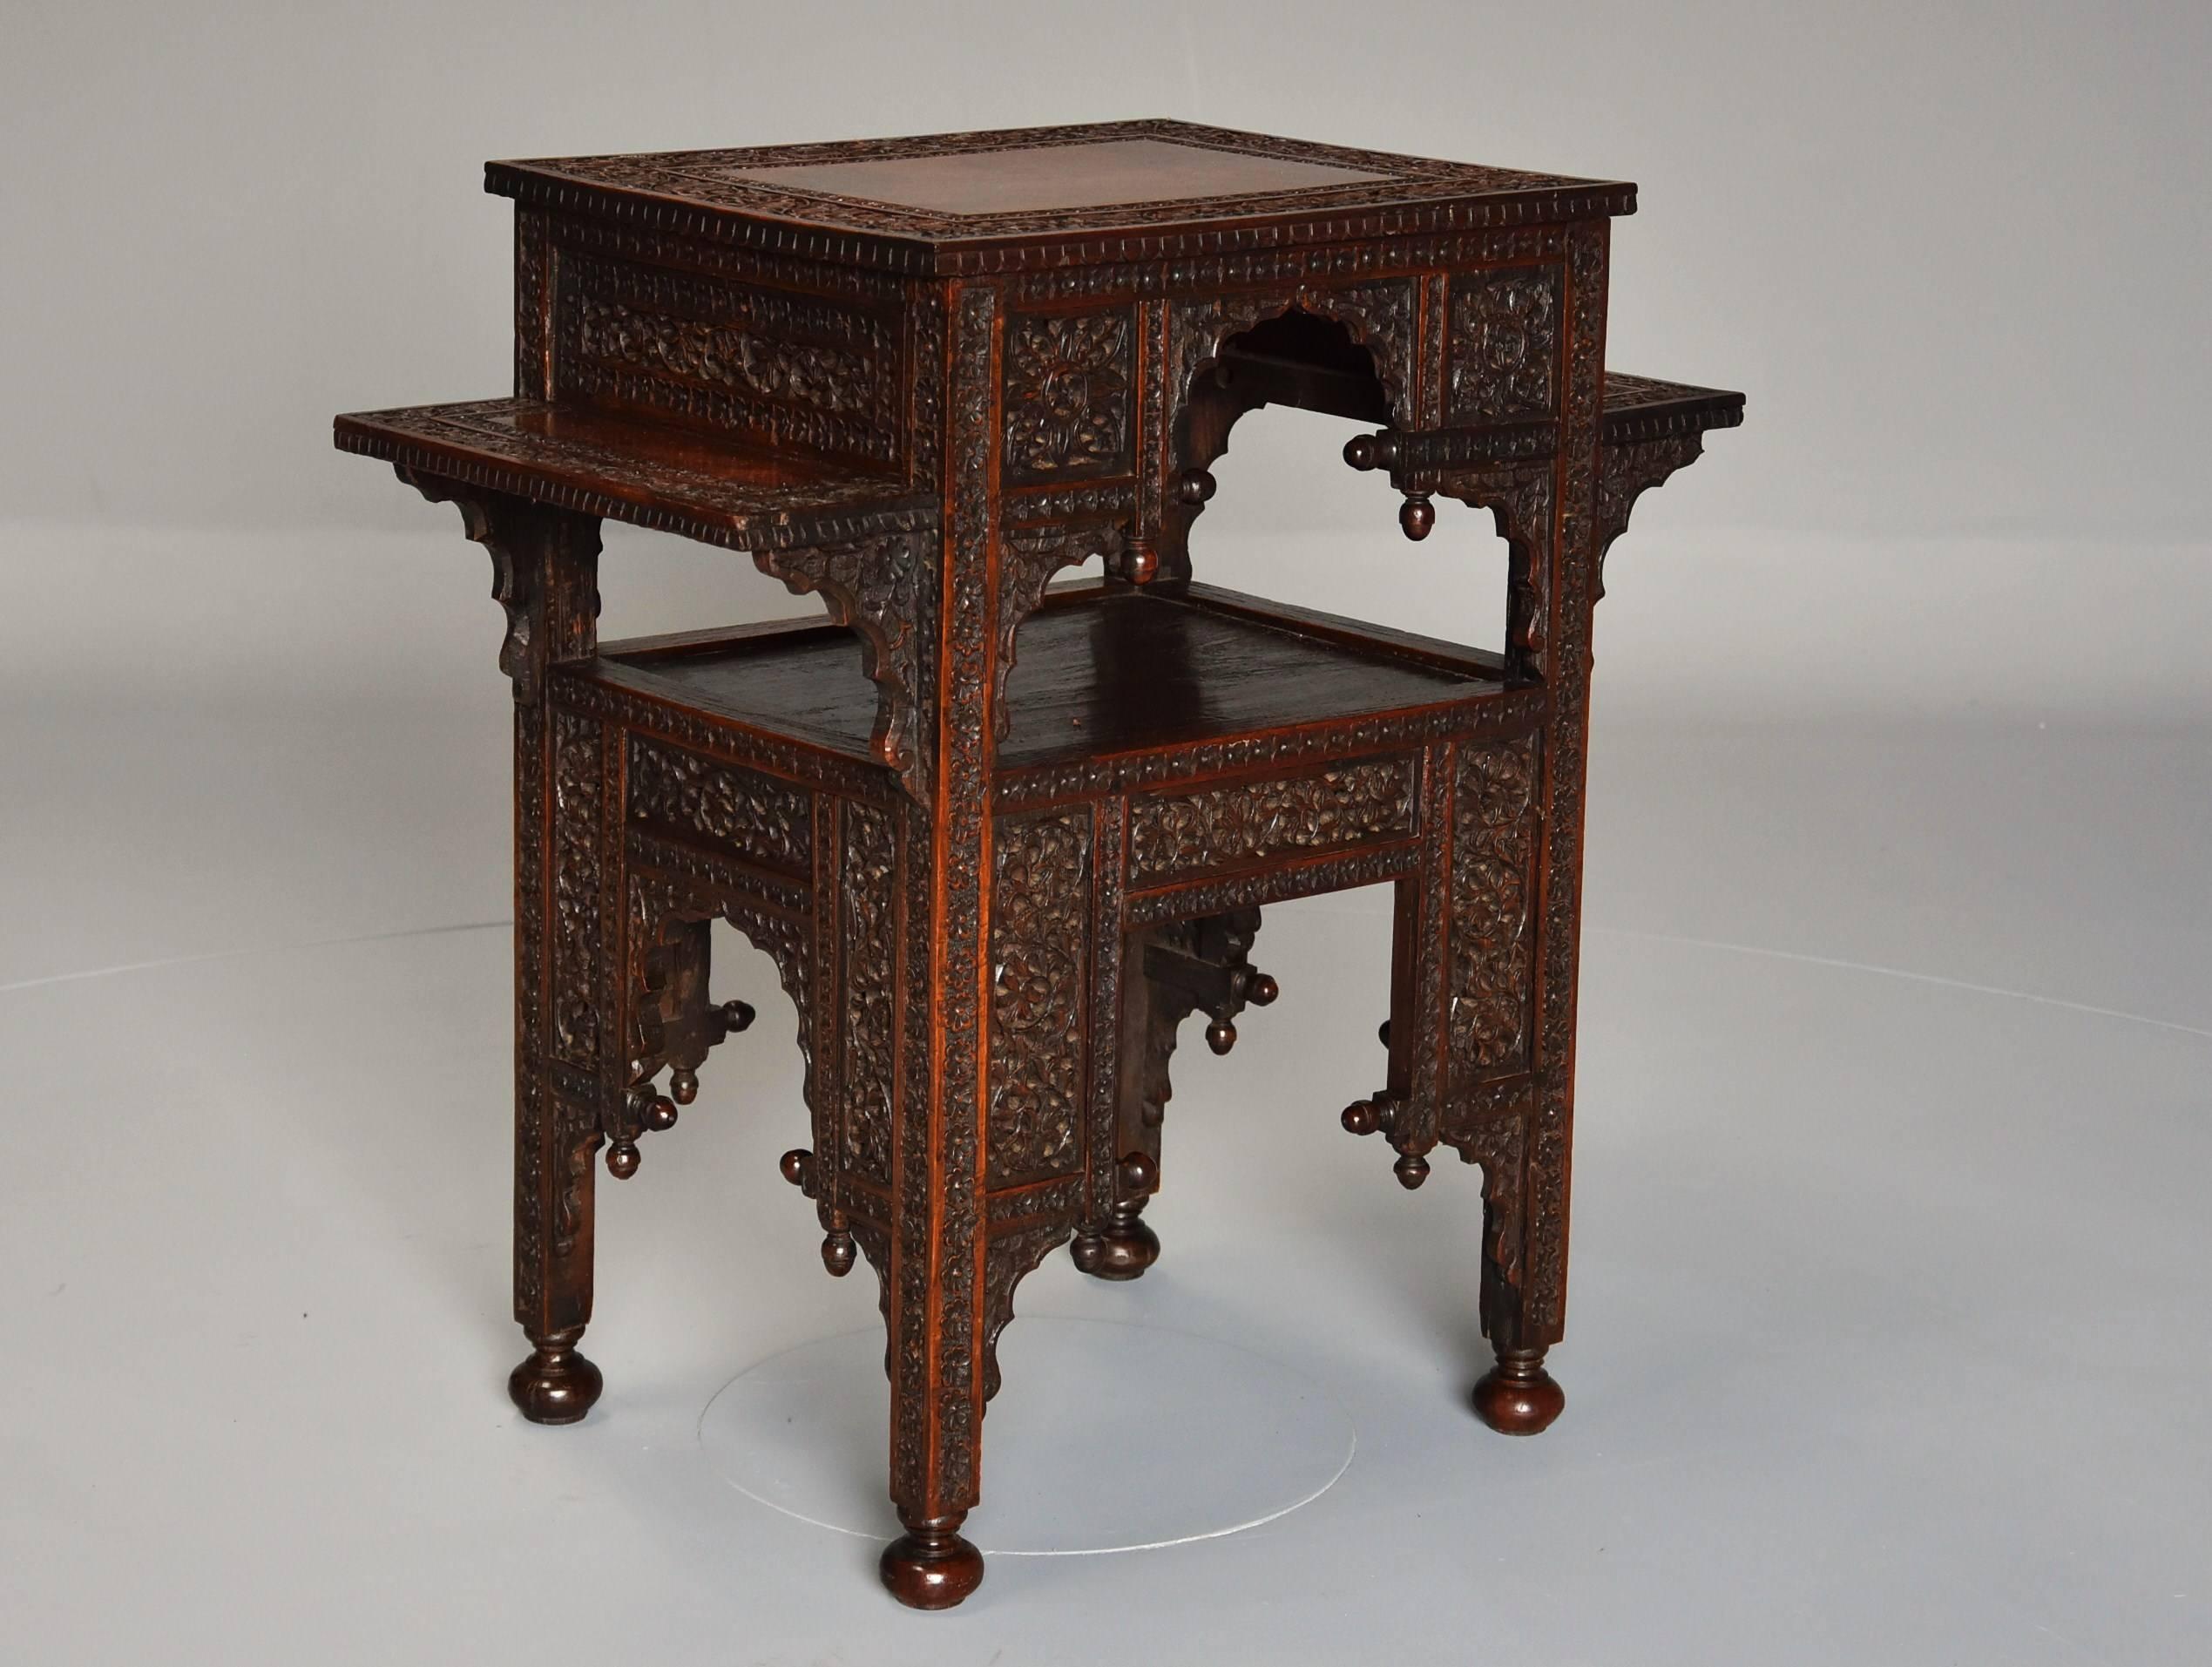 A late 19th century Anglo-Indian padouk two-tier freestanding occasional table.

This table consists of a rectangular top with carved floral border leading onto a wider frieze profusely carved with foliate decoration.

This leads down to a